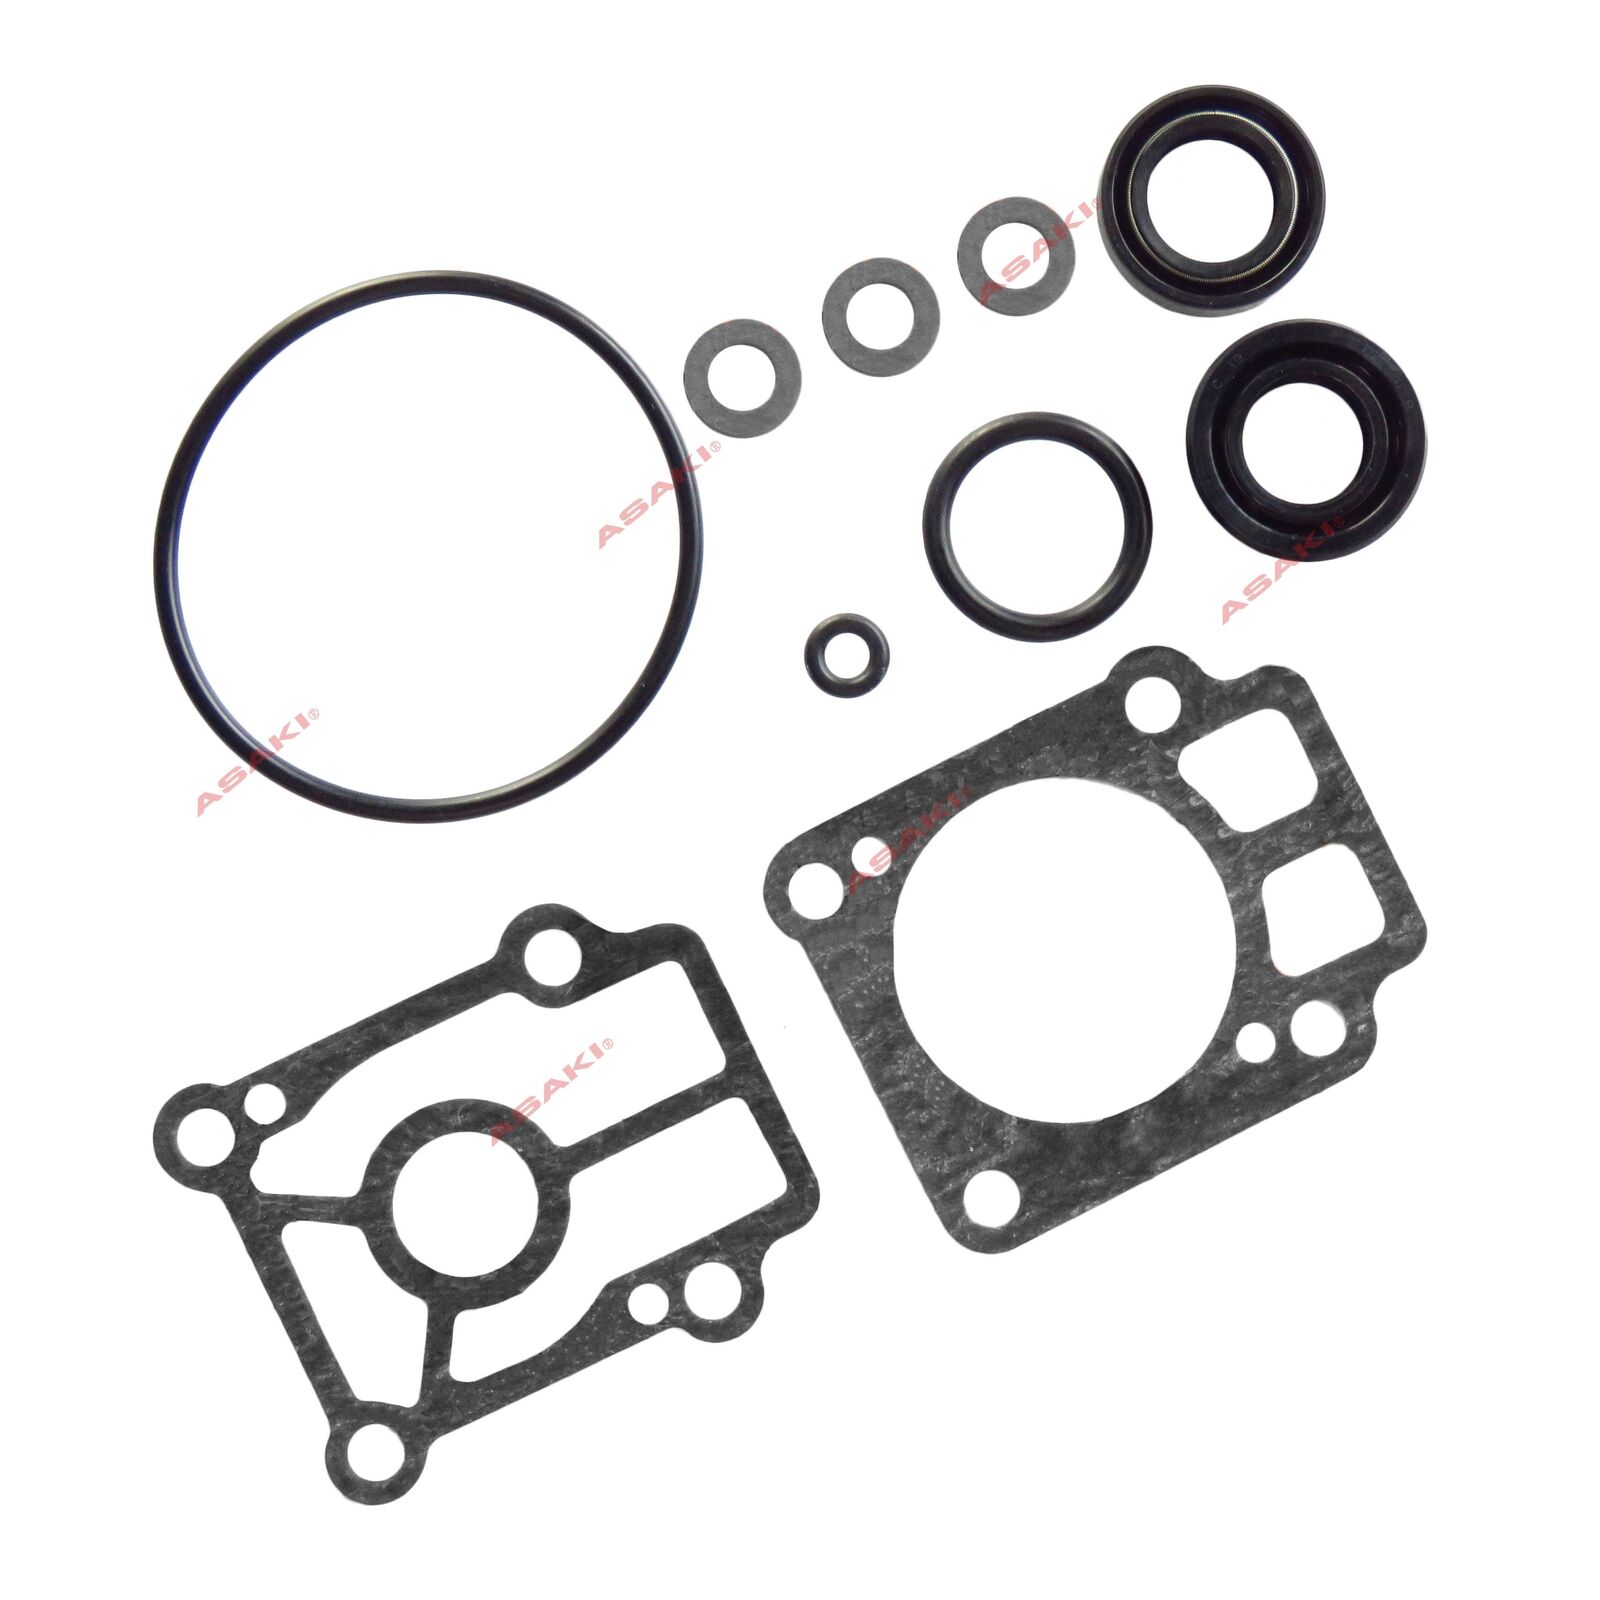 For TOHATSU NISSAN Motor 25/30HP NS25C2 NS30A4 Lower Unit Gasket Kit 346-87321-6